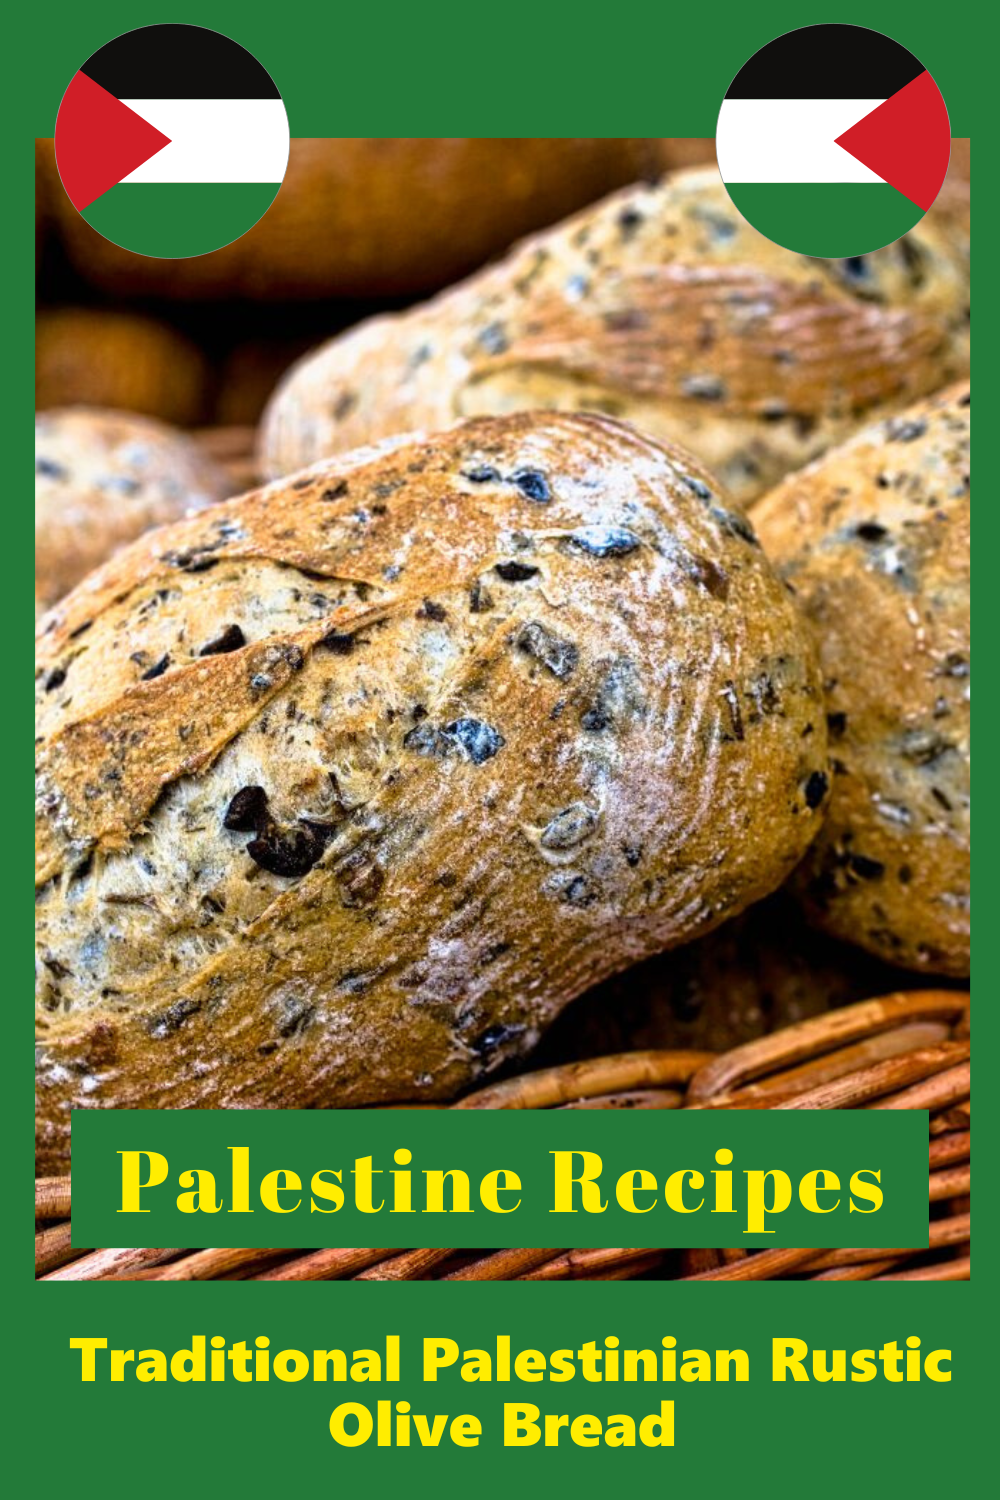 _9. Traditional Palestinian Rustic Olive Bread